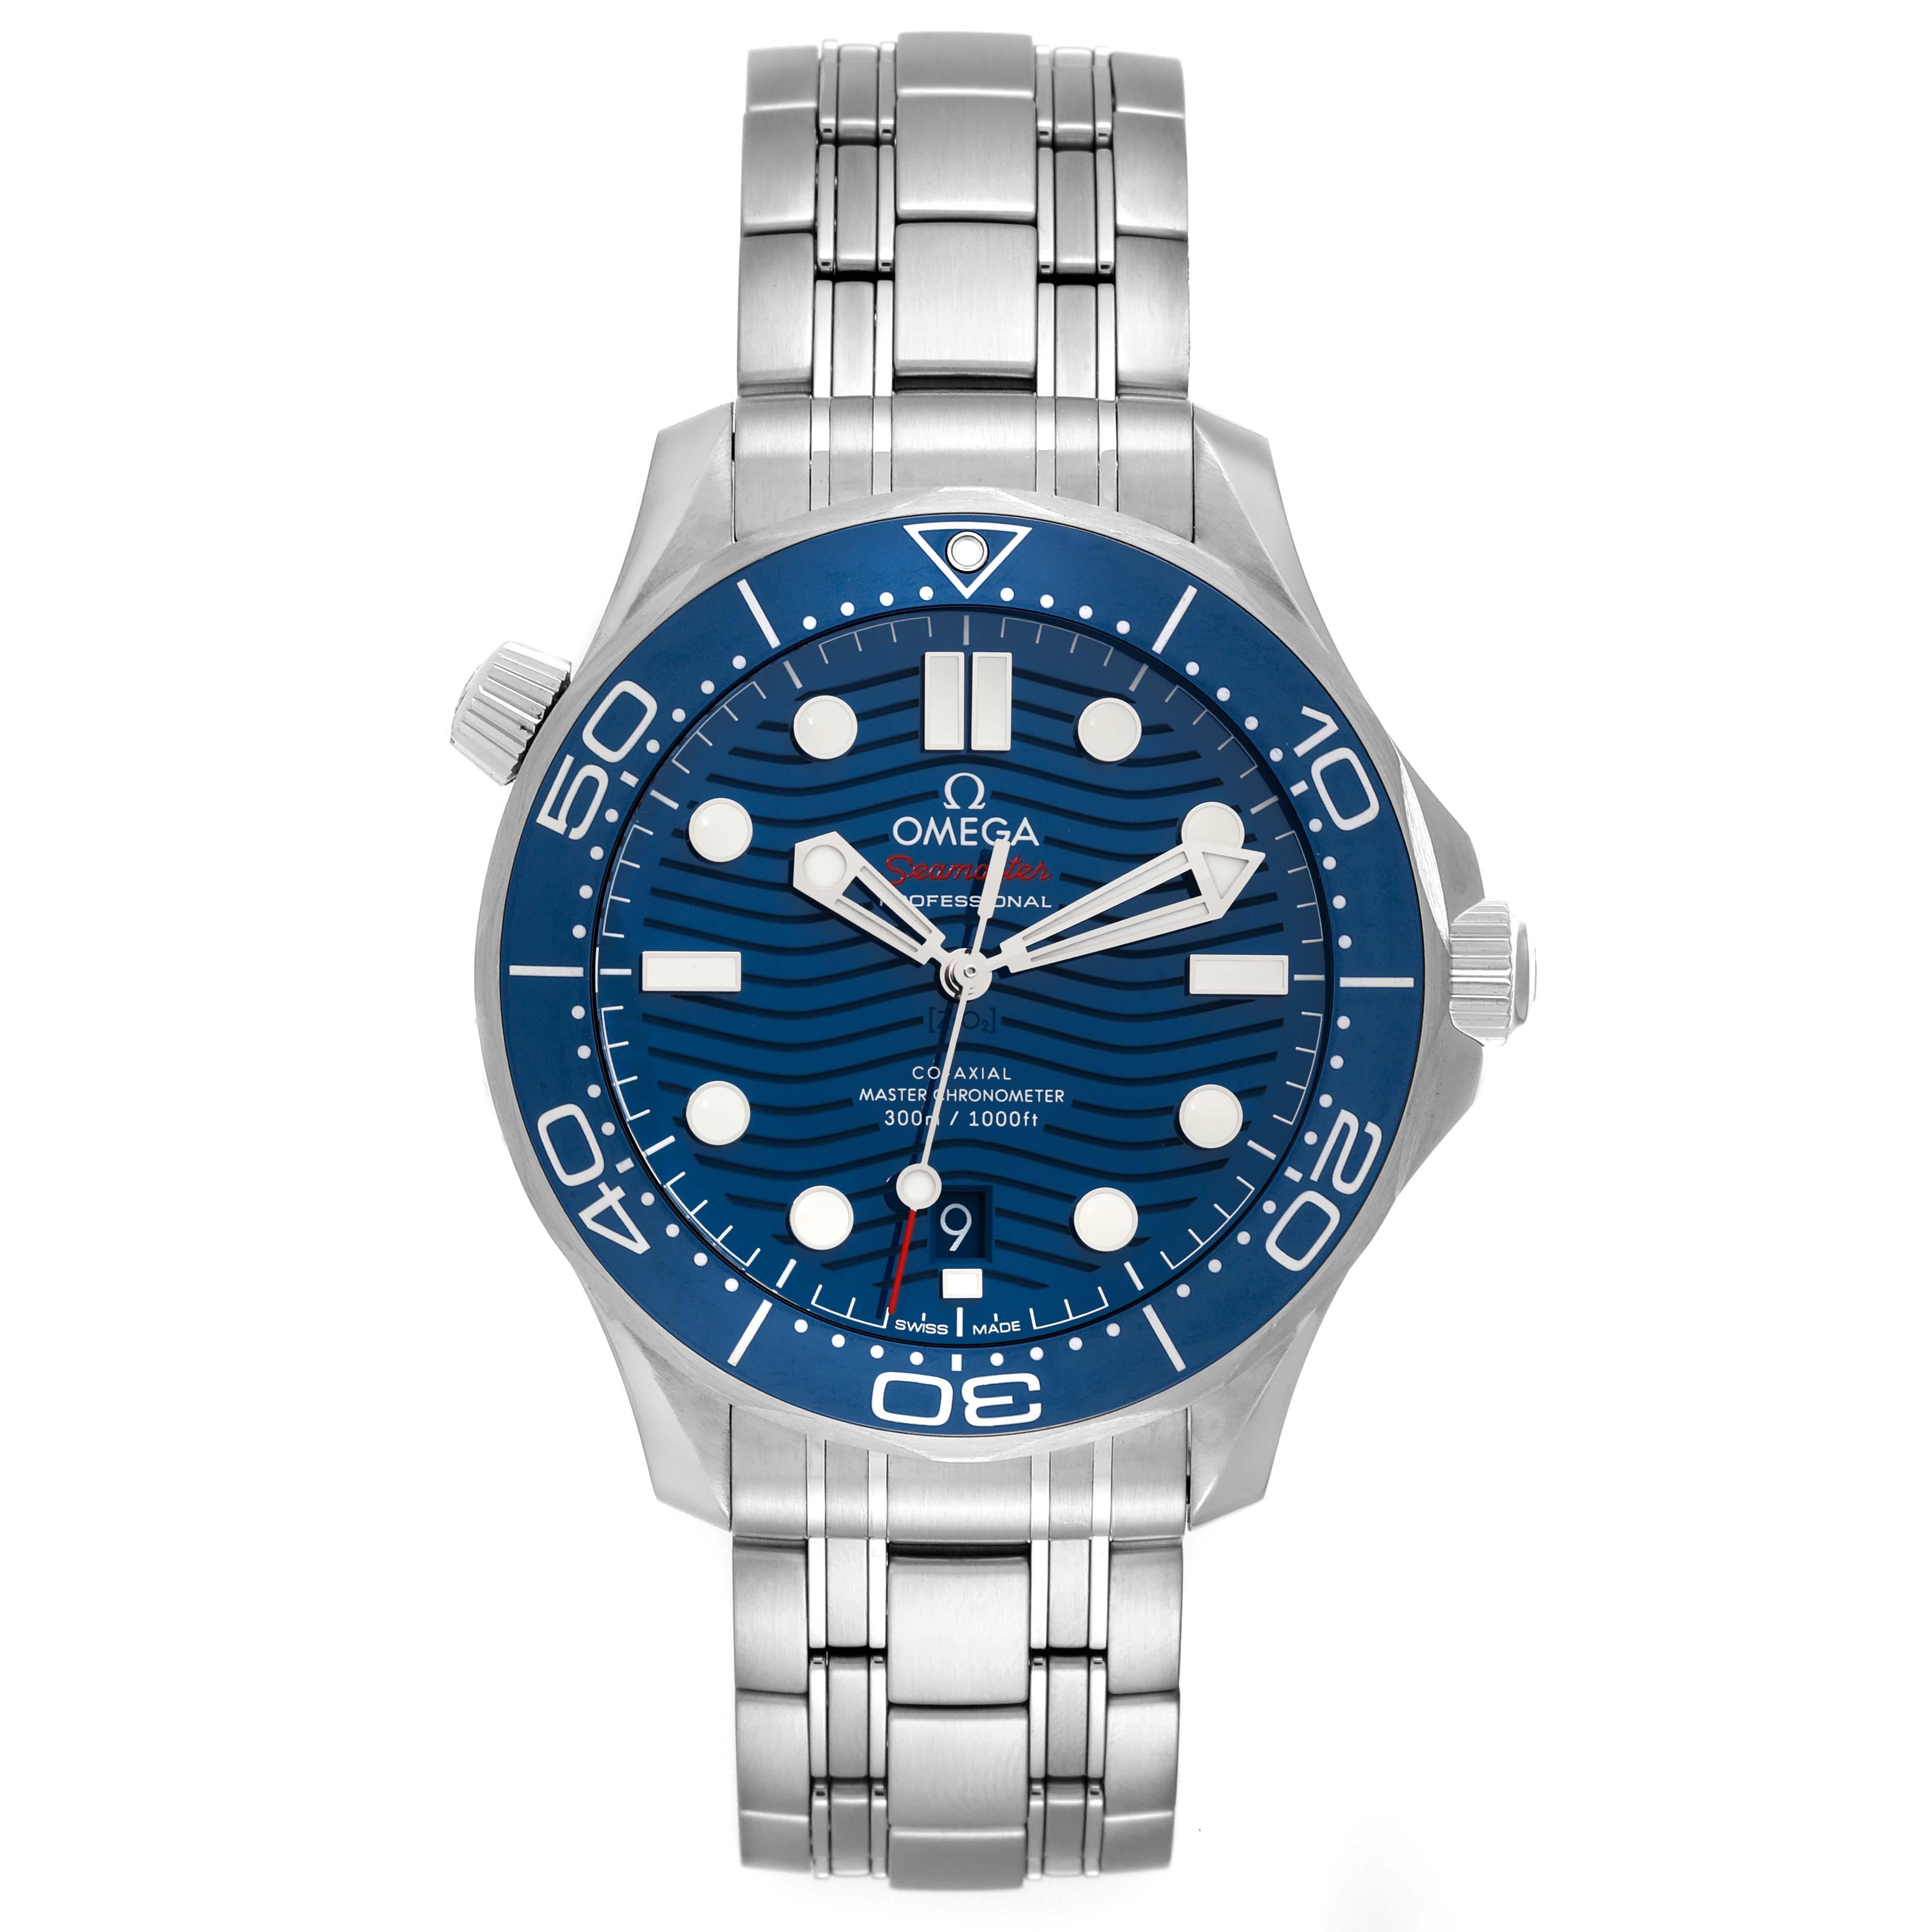 Omega Seamaster Diver 300M Blue Dial Steel Mens Watch 210.30.42.20.03.001. Automatic self-winding chronometer, Co-Axial Escapement movement with rhodium-plated finish. Stainless steel case 42.0 mm in diameter. Helium escape valve at 10 o'clock.